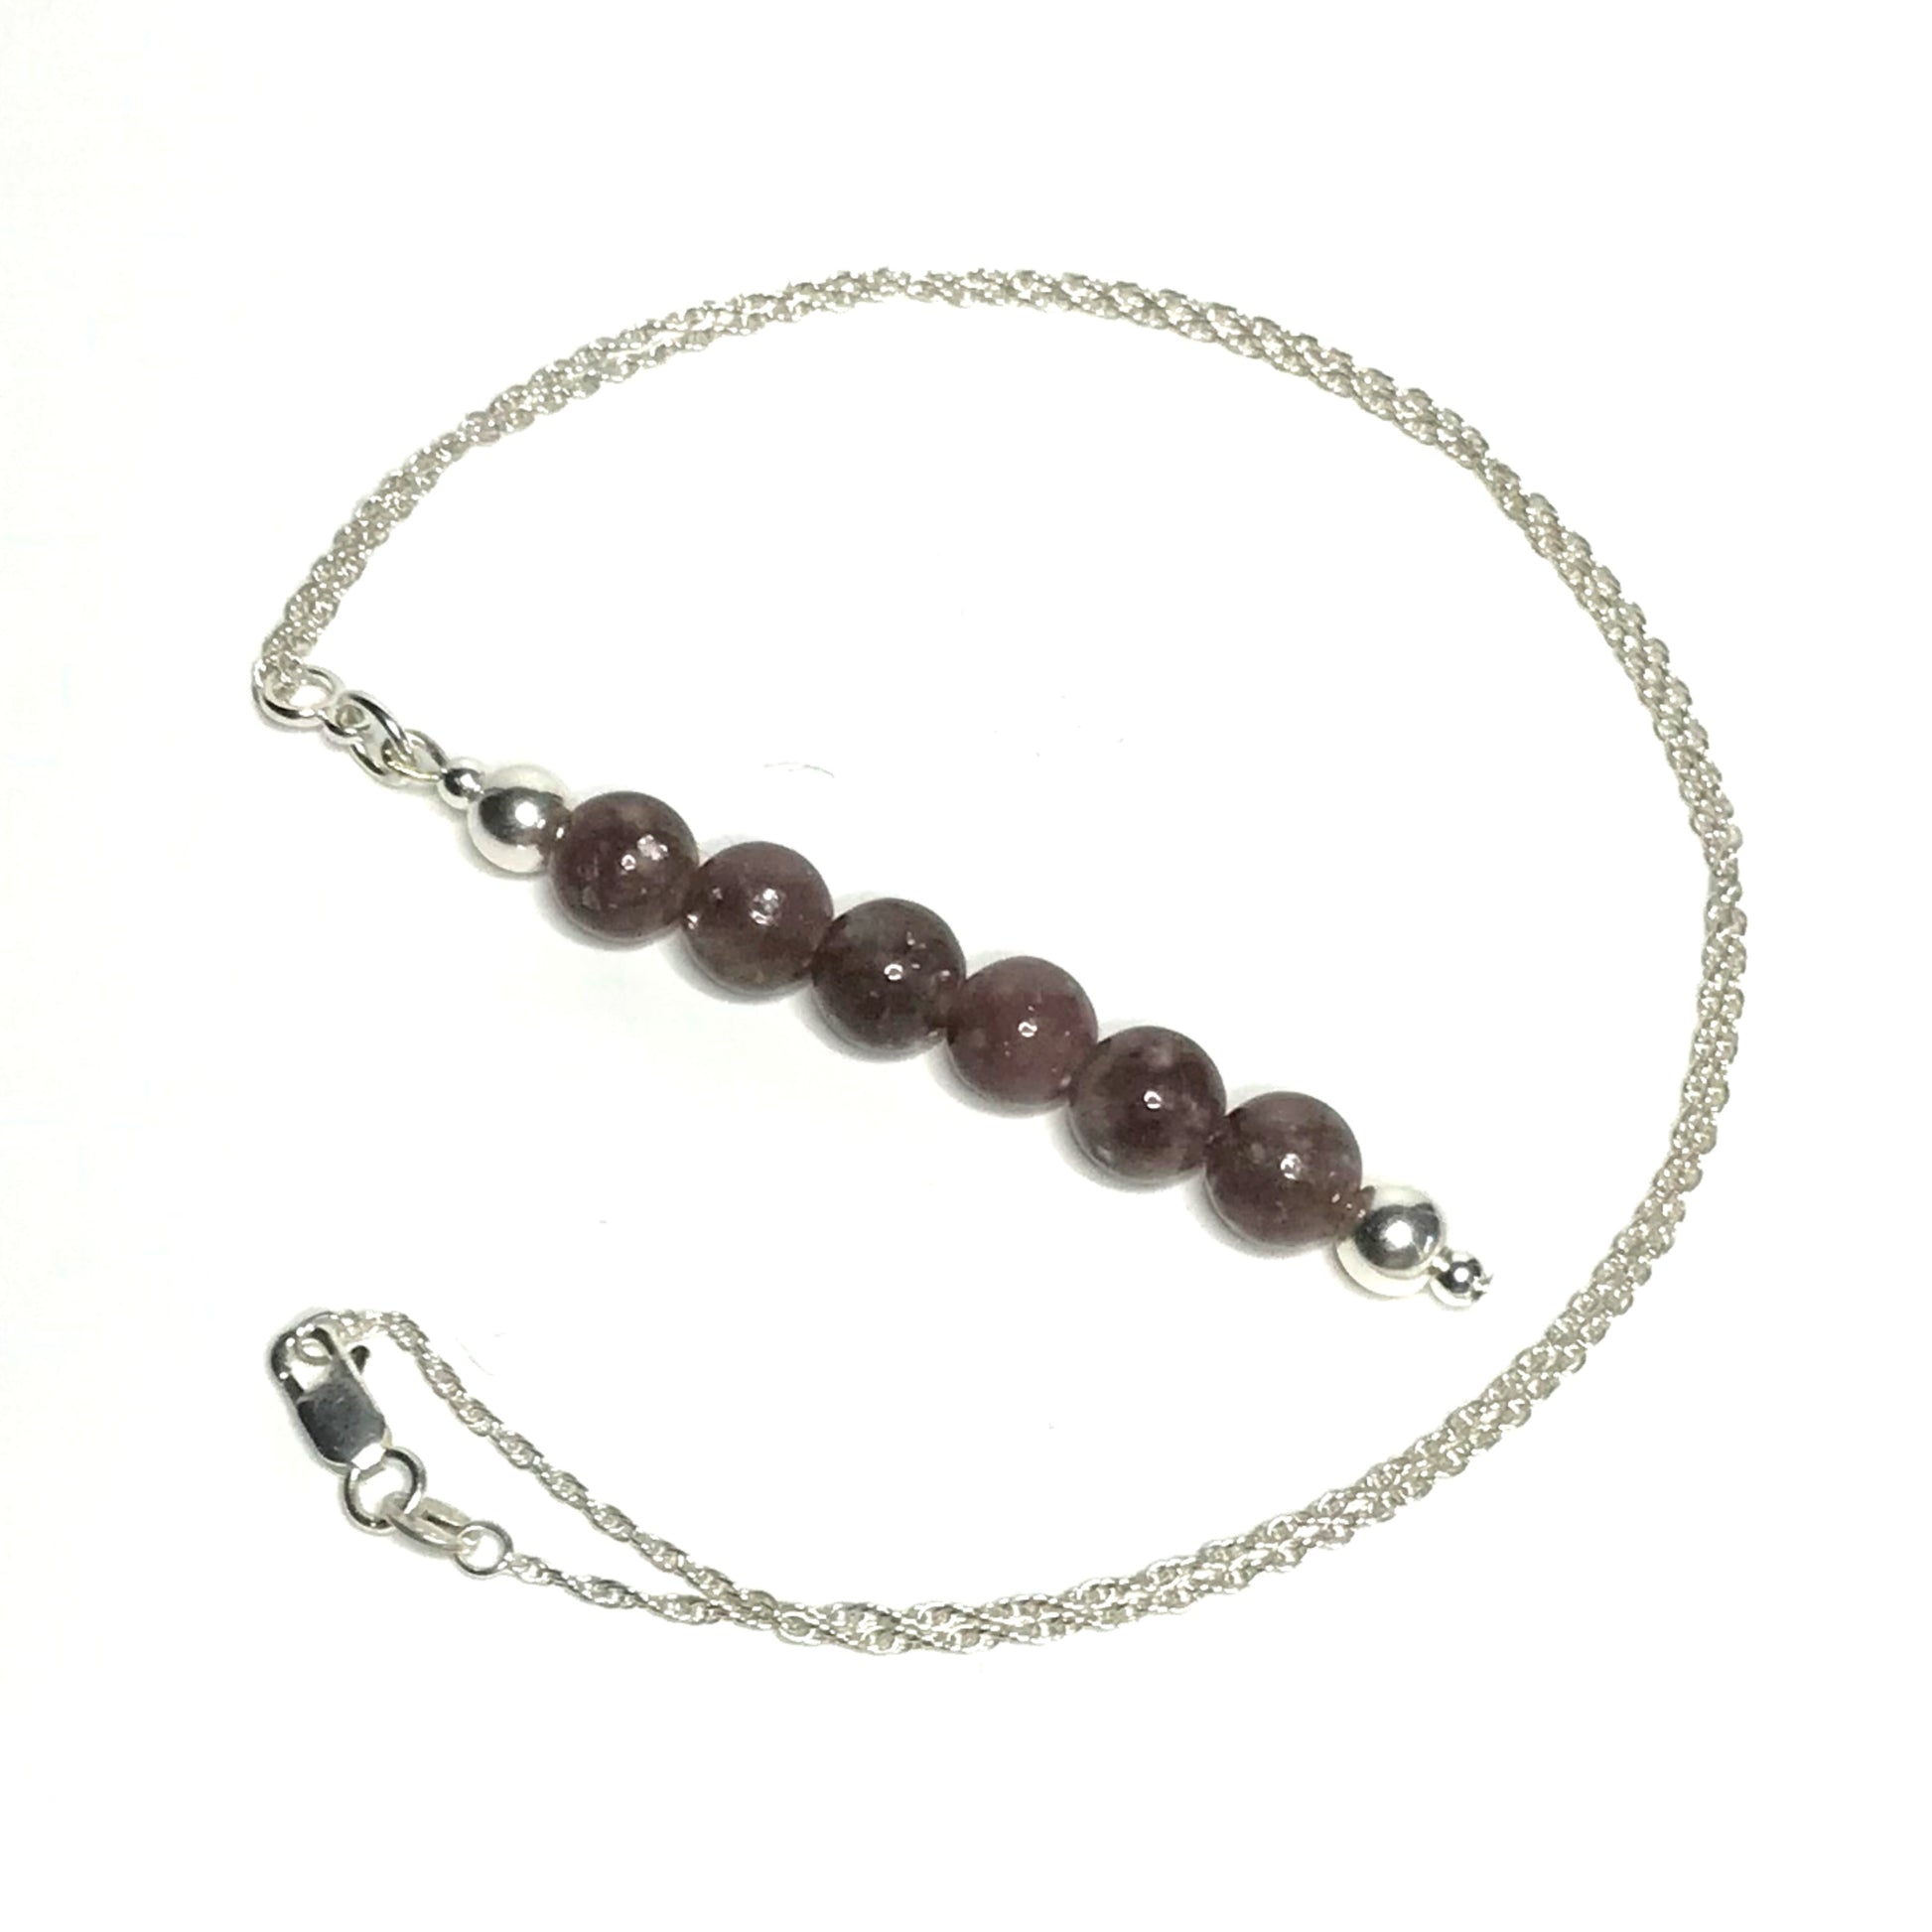 Lepidolite pendant with silver chain